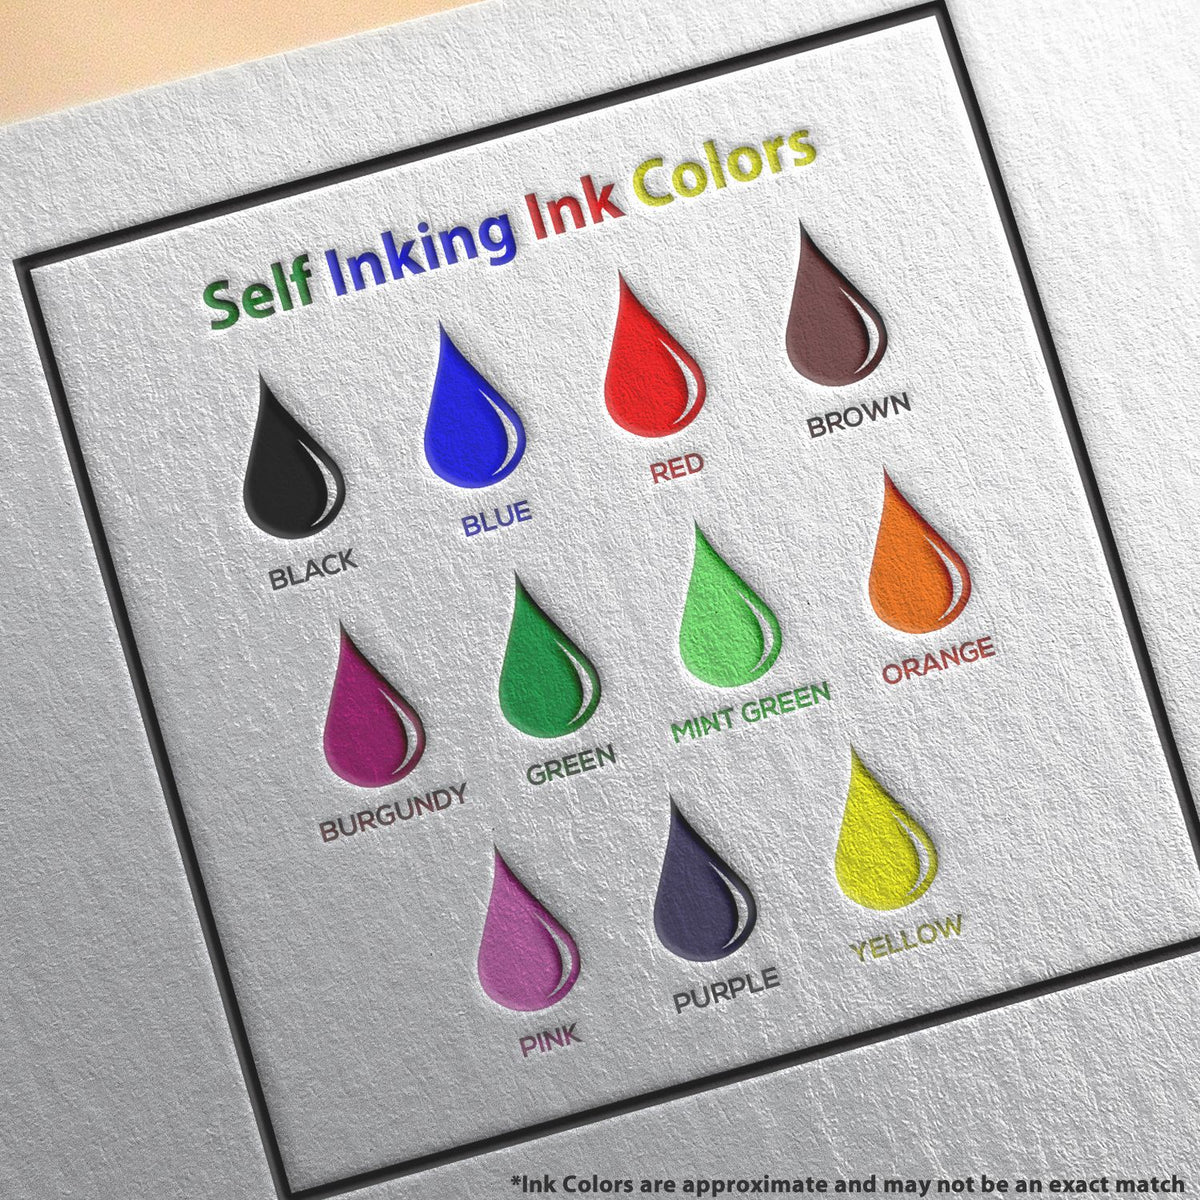 A picture showing the different ink colors or hues available for the Self-Inking Rectangular Illinois Notary Stamp product.